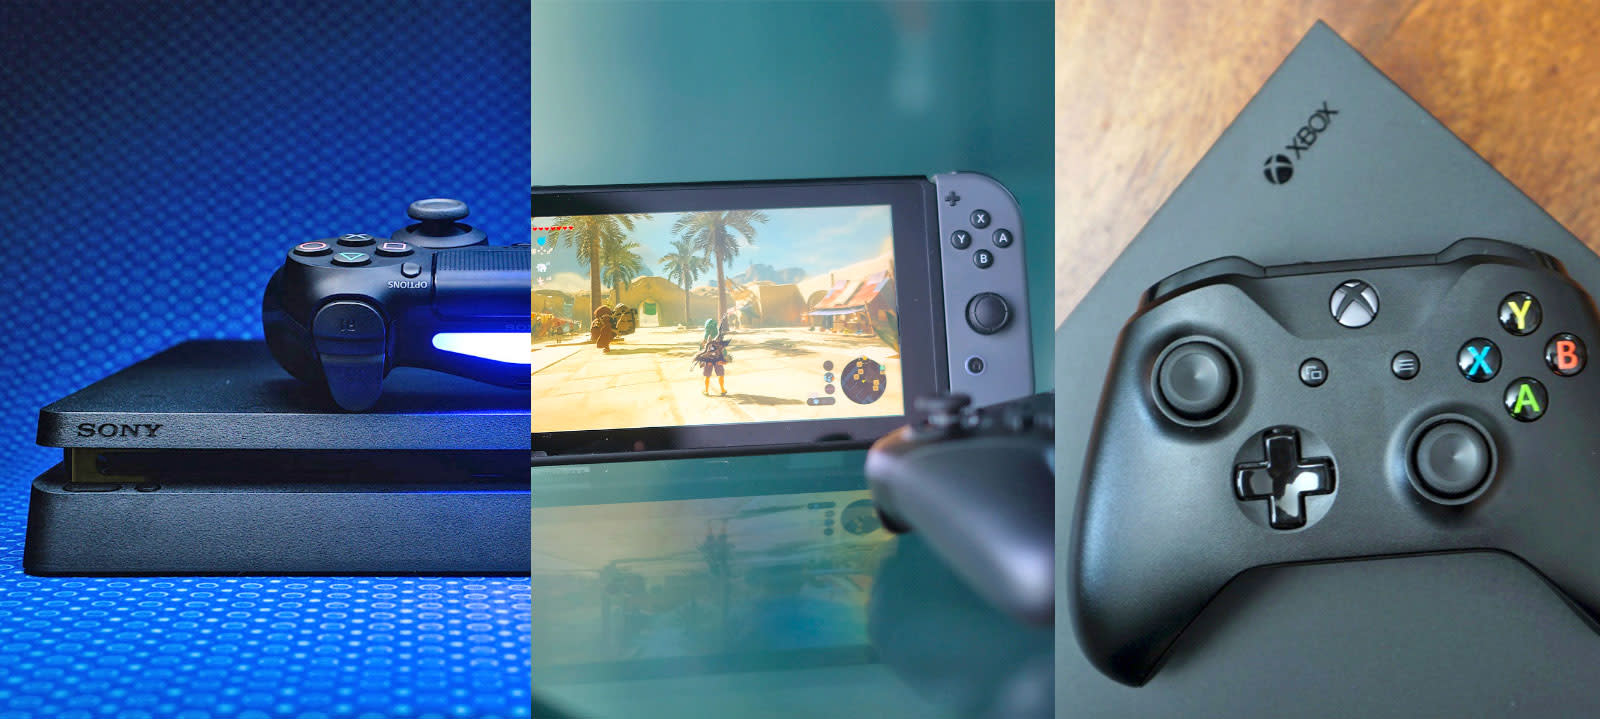 best family gaming console 2018